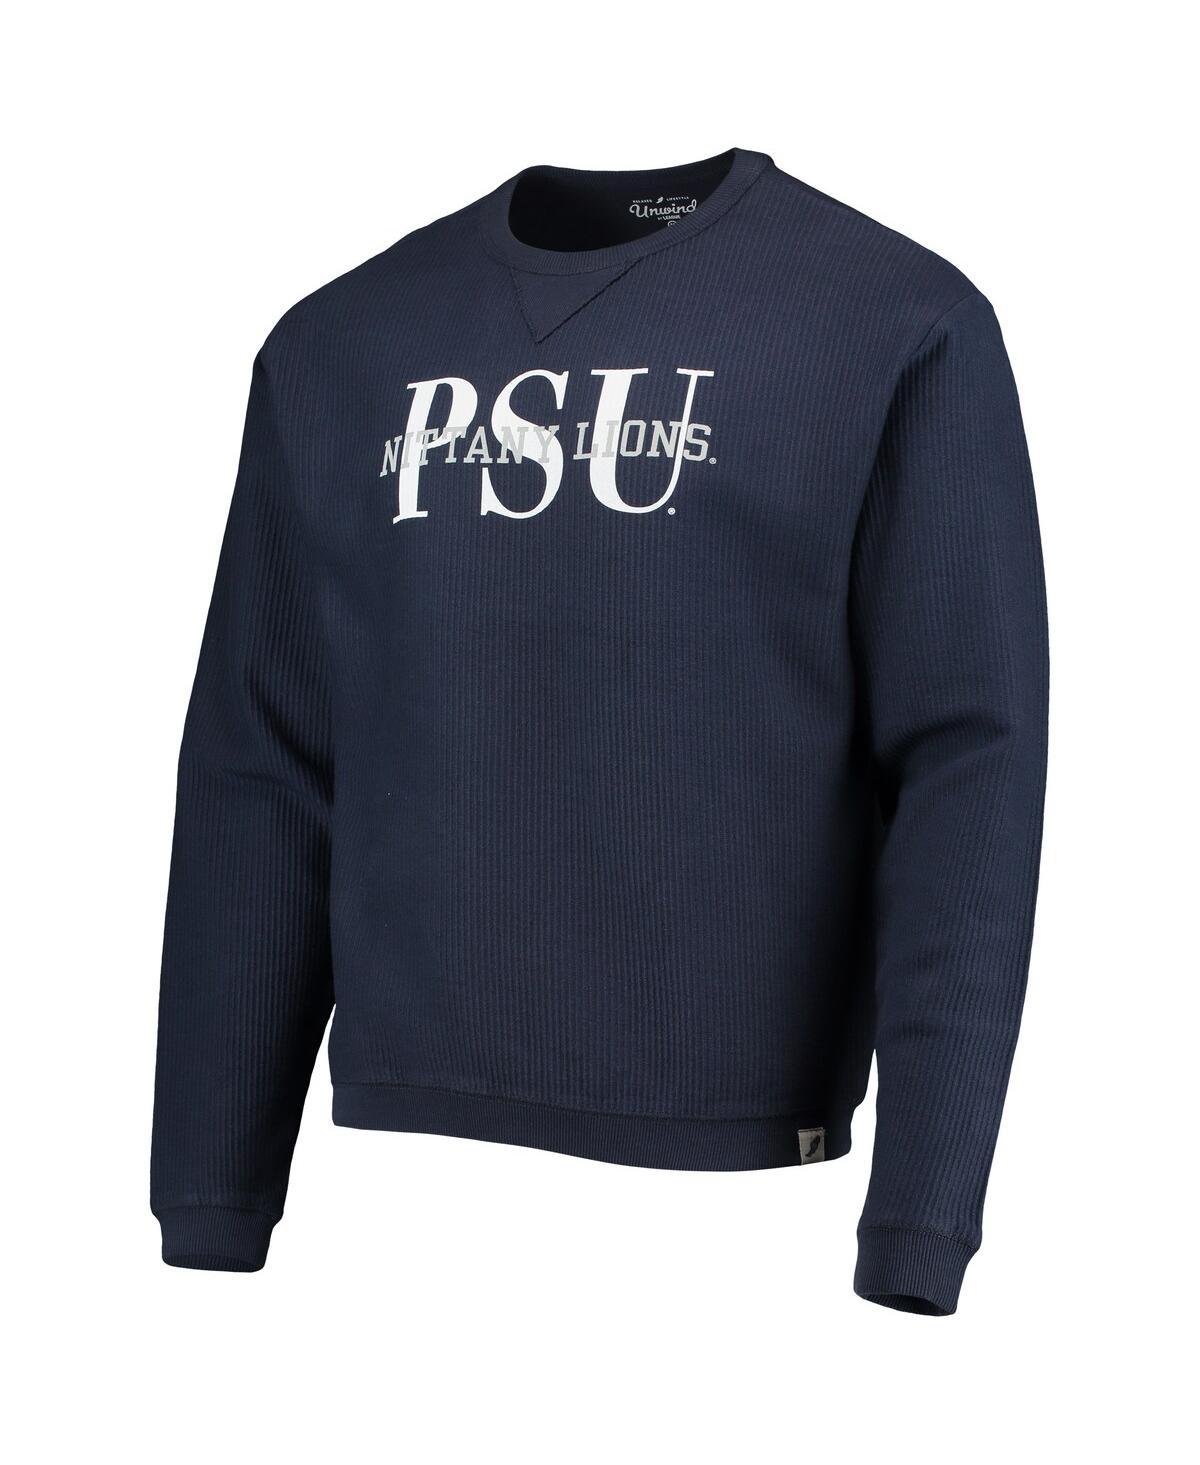 Shop League Collegiate Wear Men's  Navy Penn State Nittany Lions Timber Pullover Sweatshirt